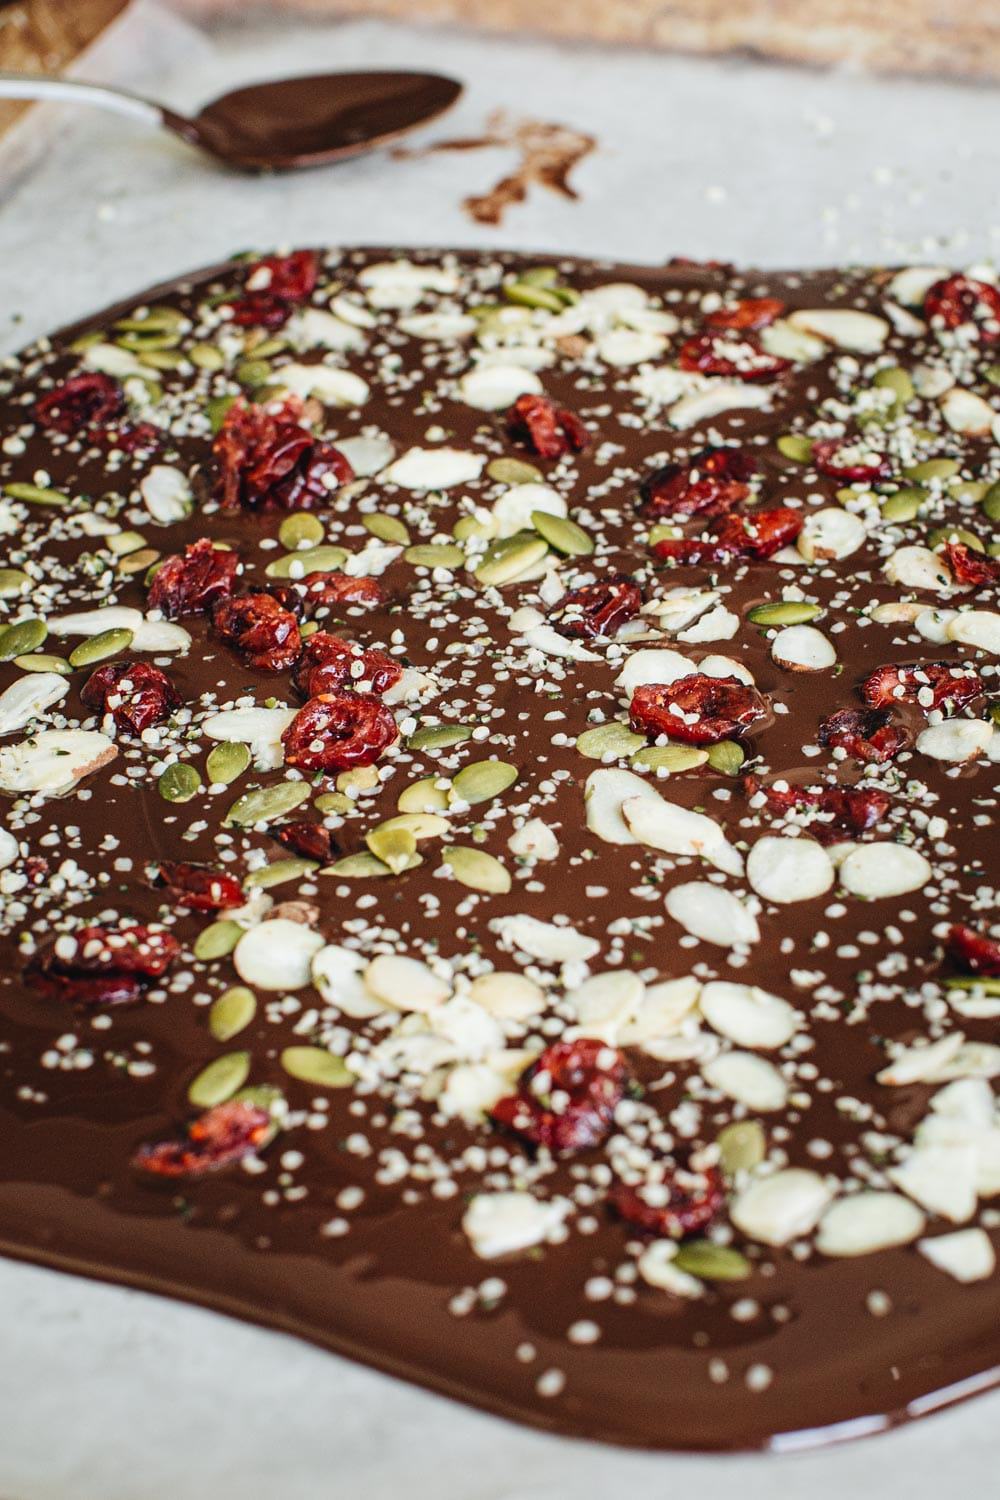 Healthy chocolate bark spread on parchment paper.